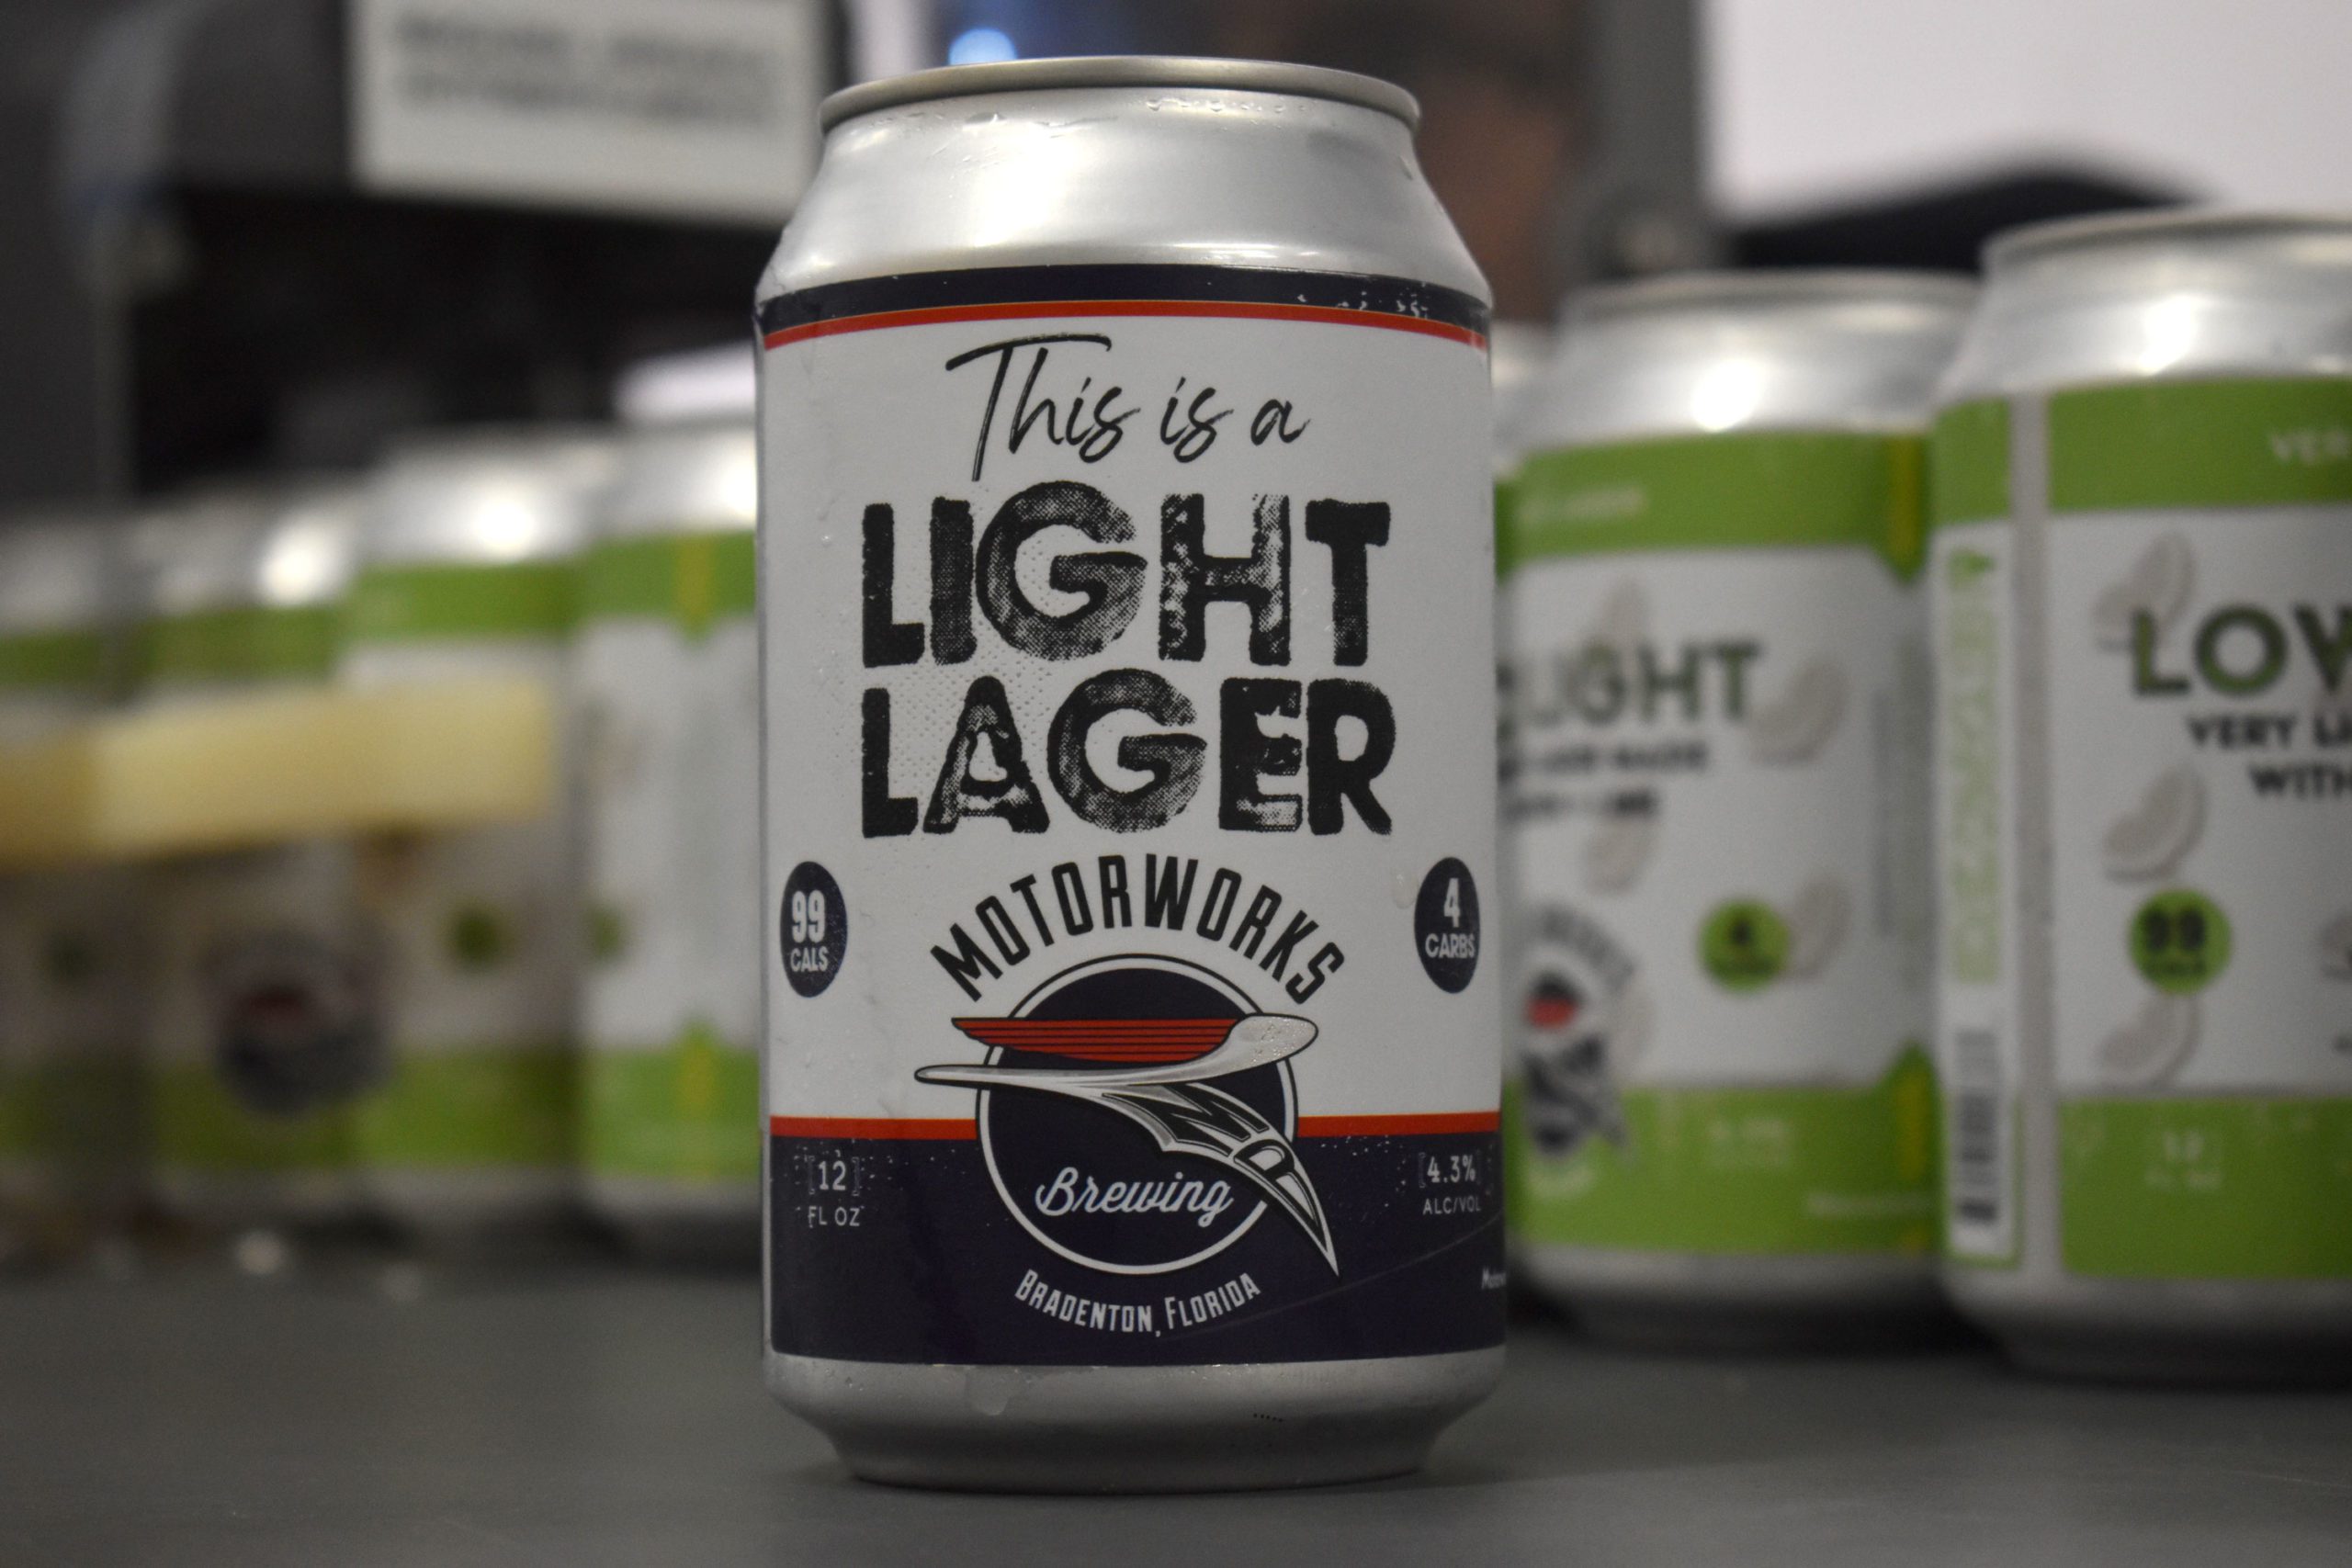 This is a Light Lager can on canning line in front of Low Light Lager cans